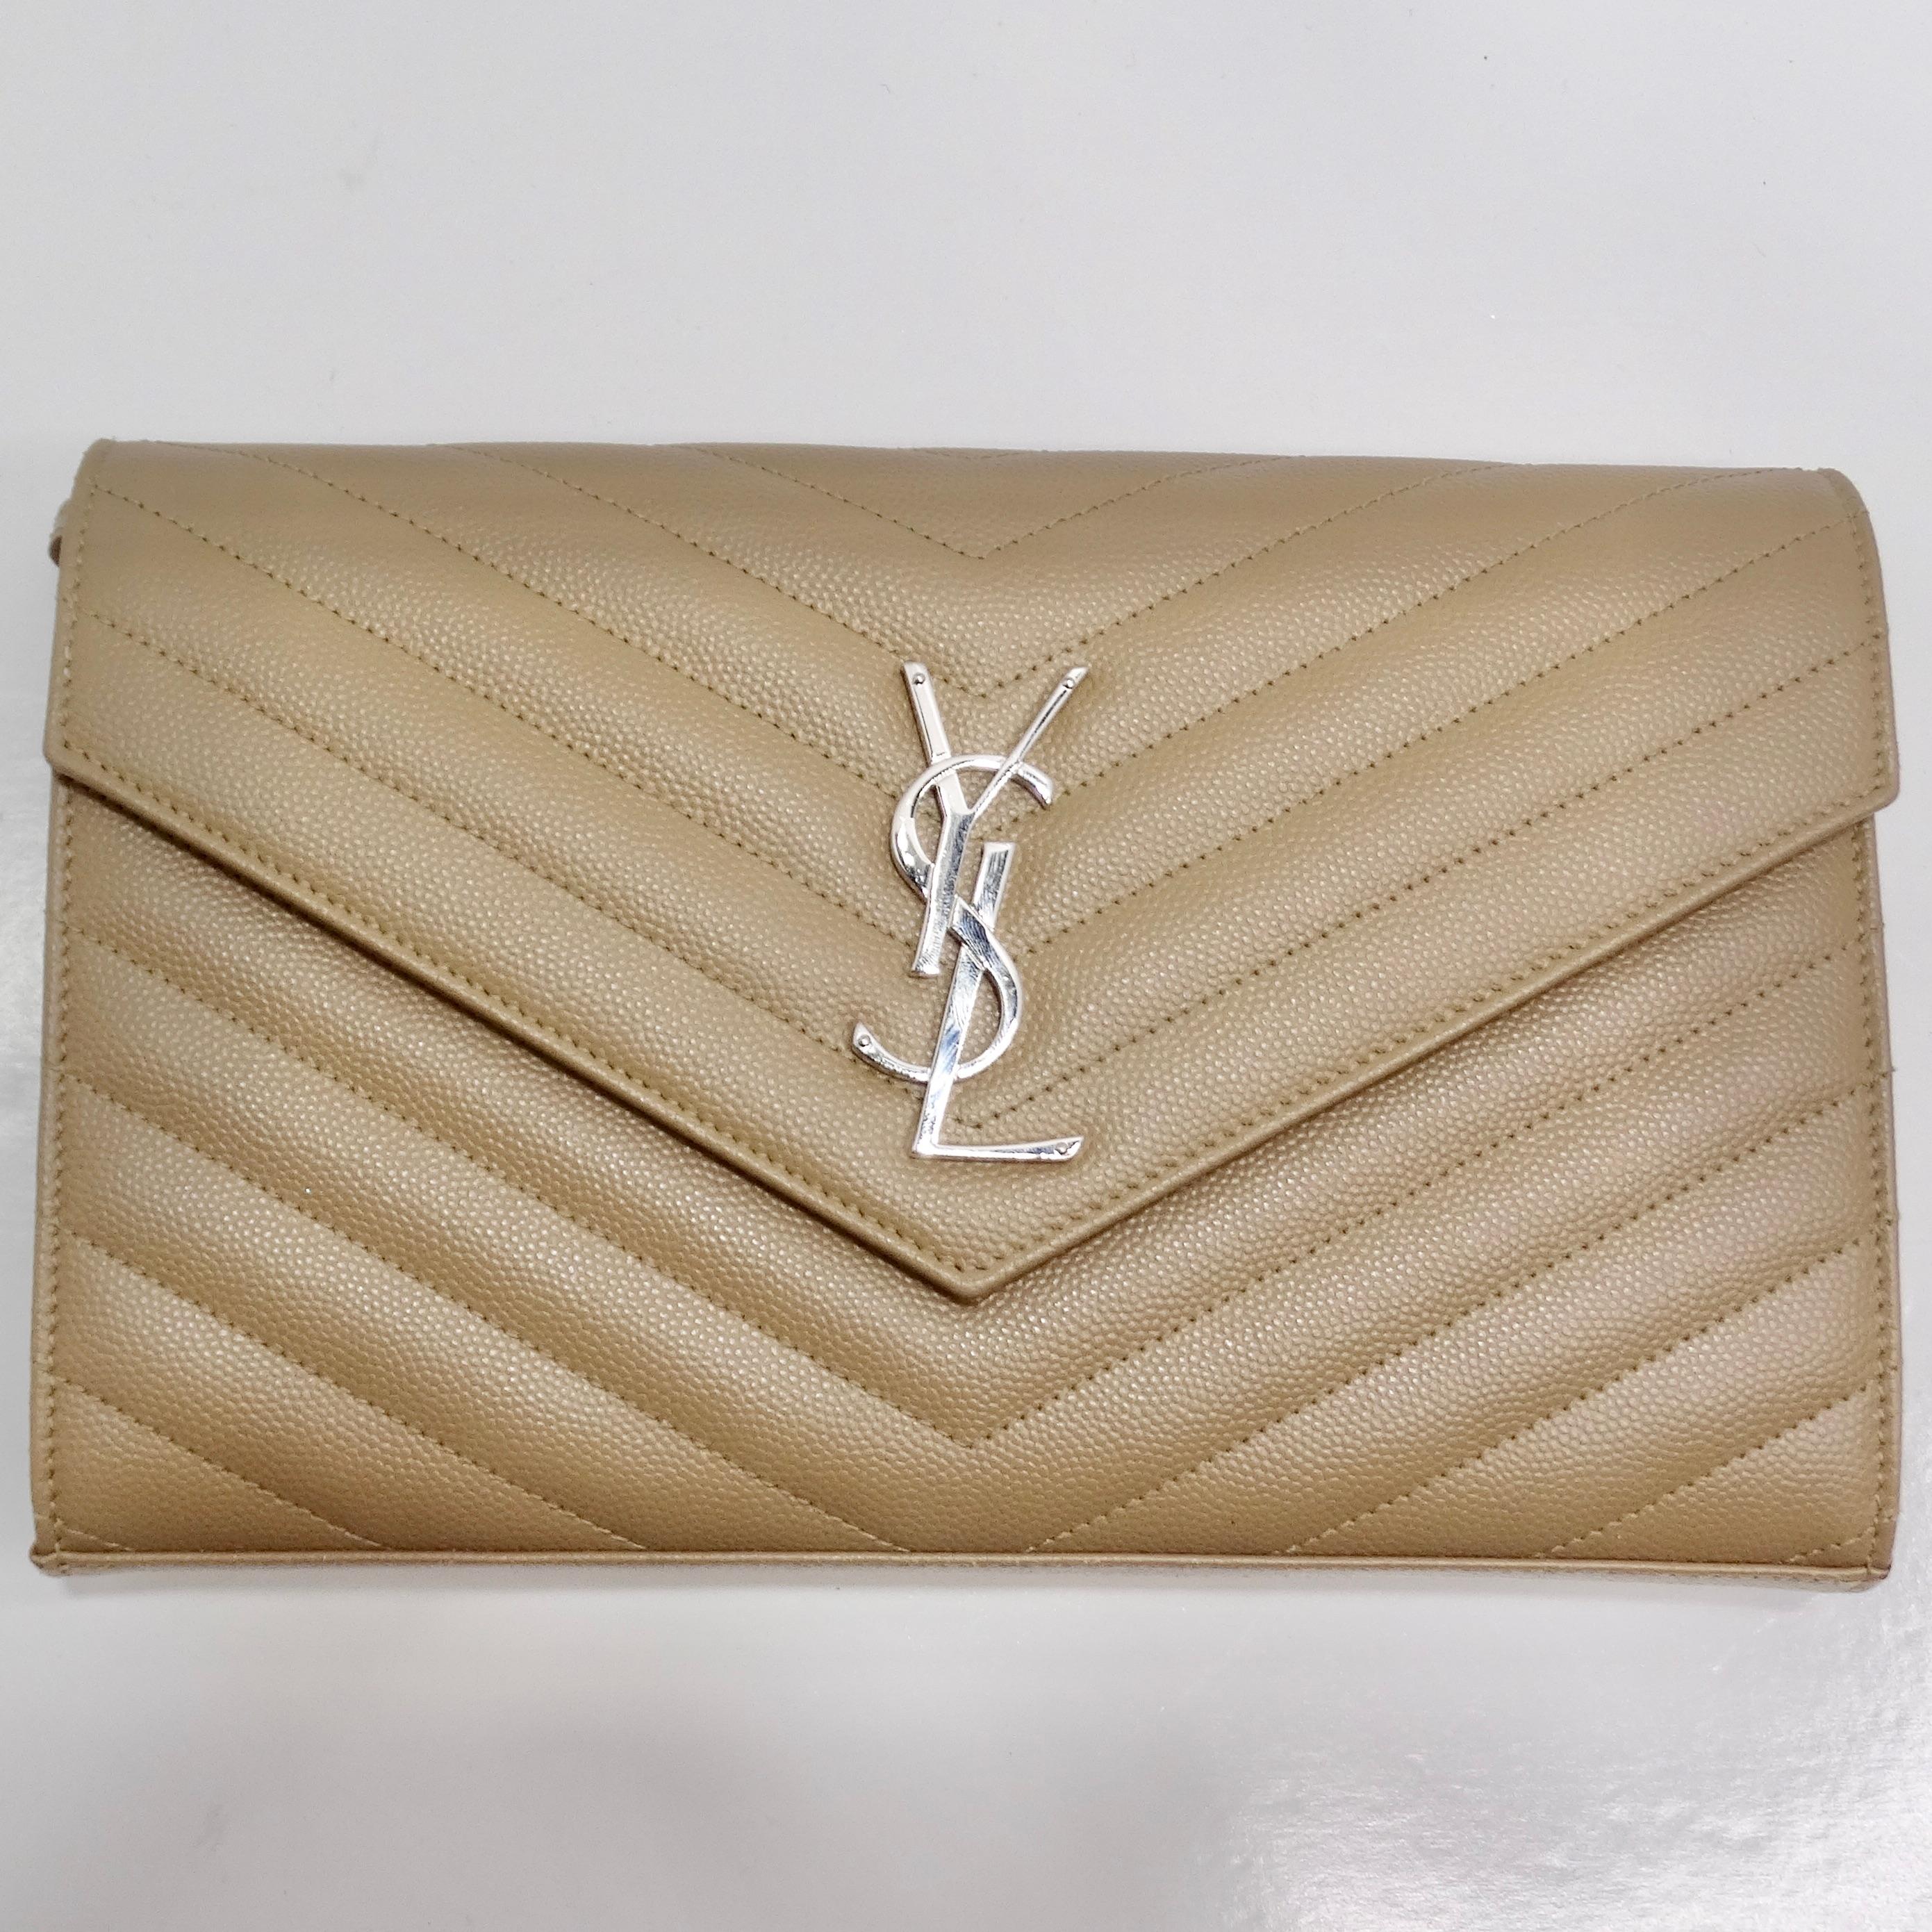 Introducing the epitome of elegance: the Saint Laurent Grain De Poudre Matelasse Chevron Quilted Chain Wallet. Crafted with meticulous attention to detail, this sophisticated accessory combines style and functionality seamlessly.

The wallet